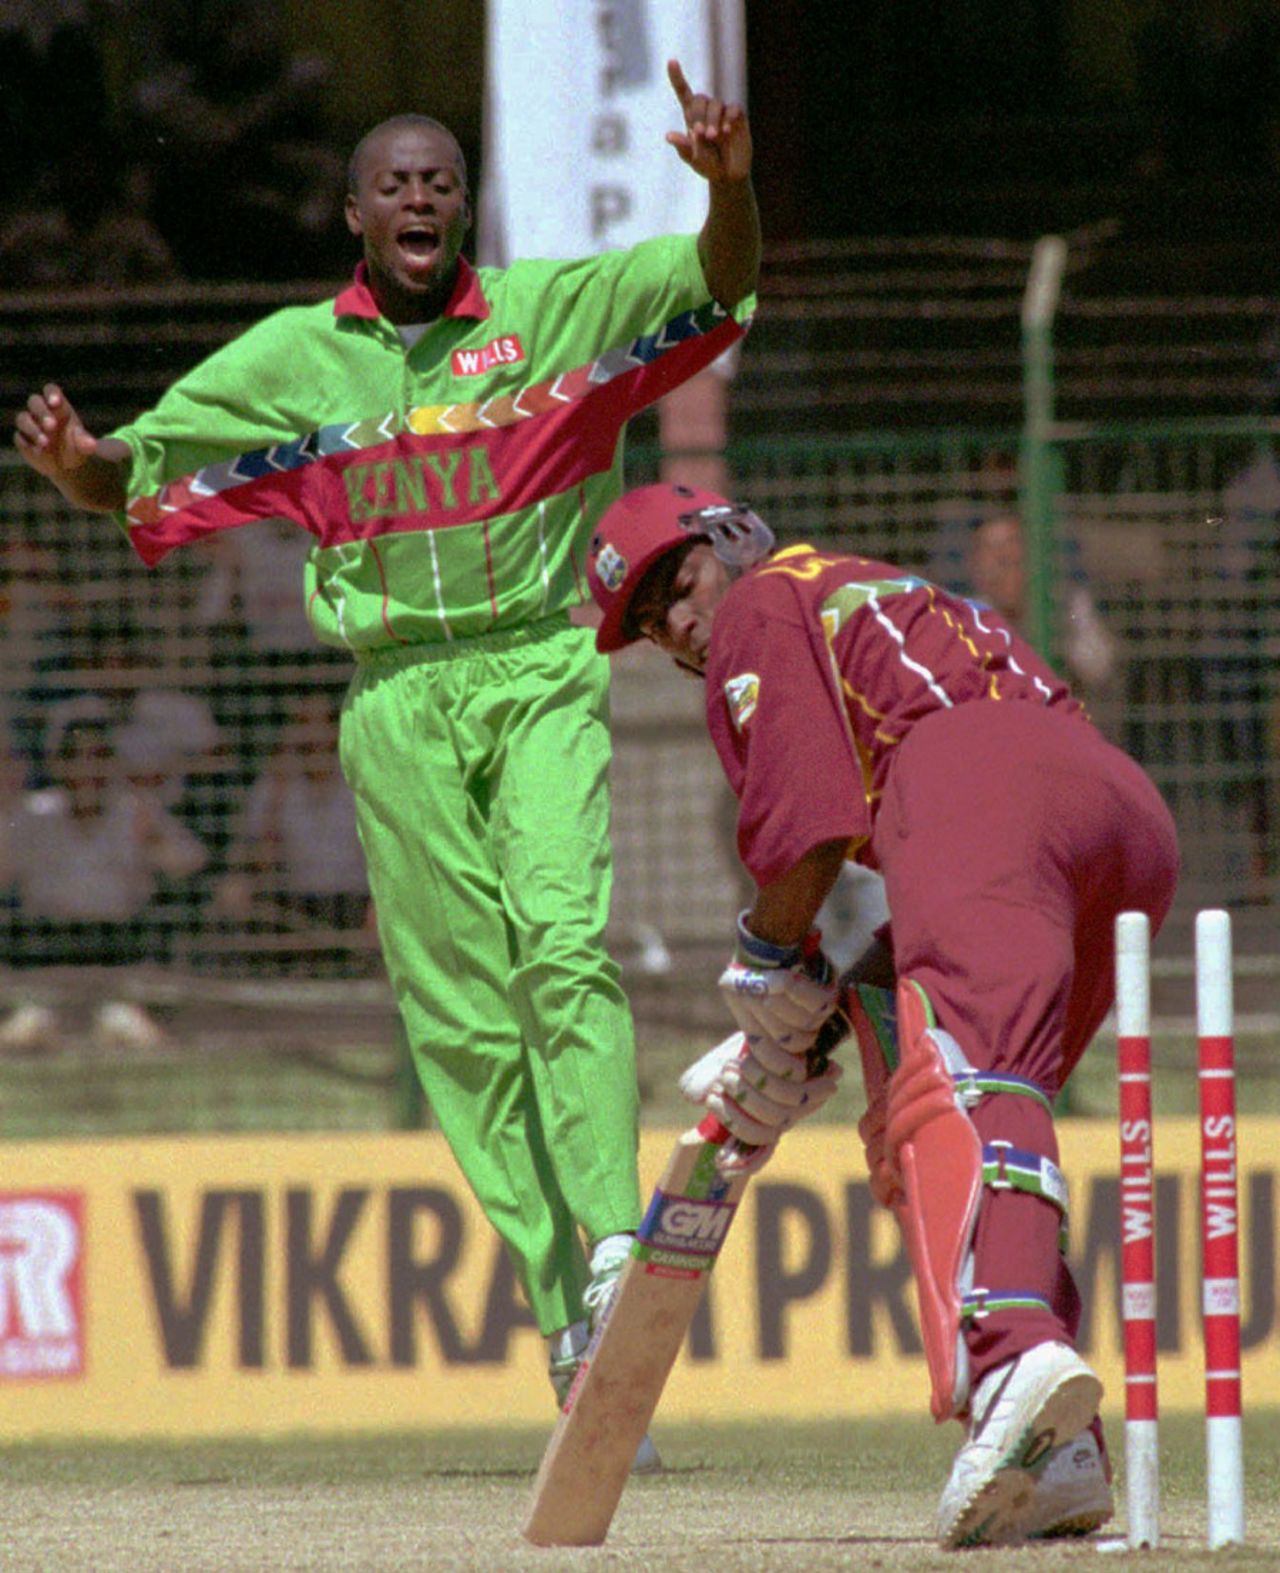 Martin Suji bowls Sherwin Campbell for 4, Kenya v West Indies, World Cup, Pune, February 29, 1996